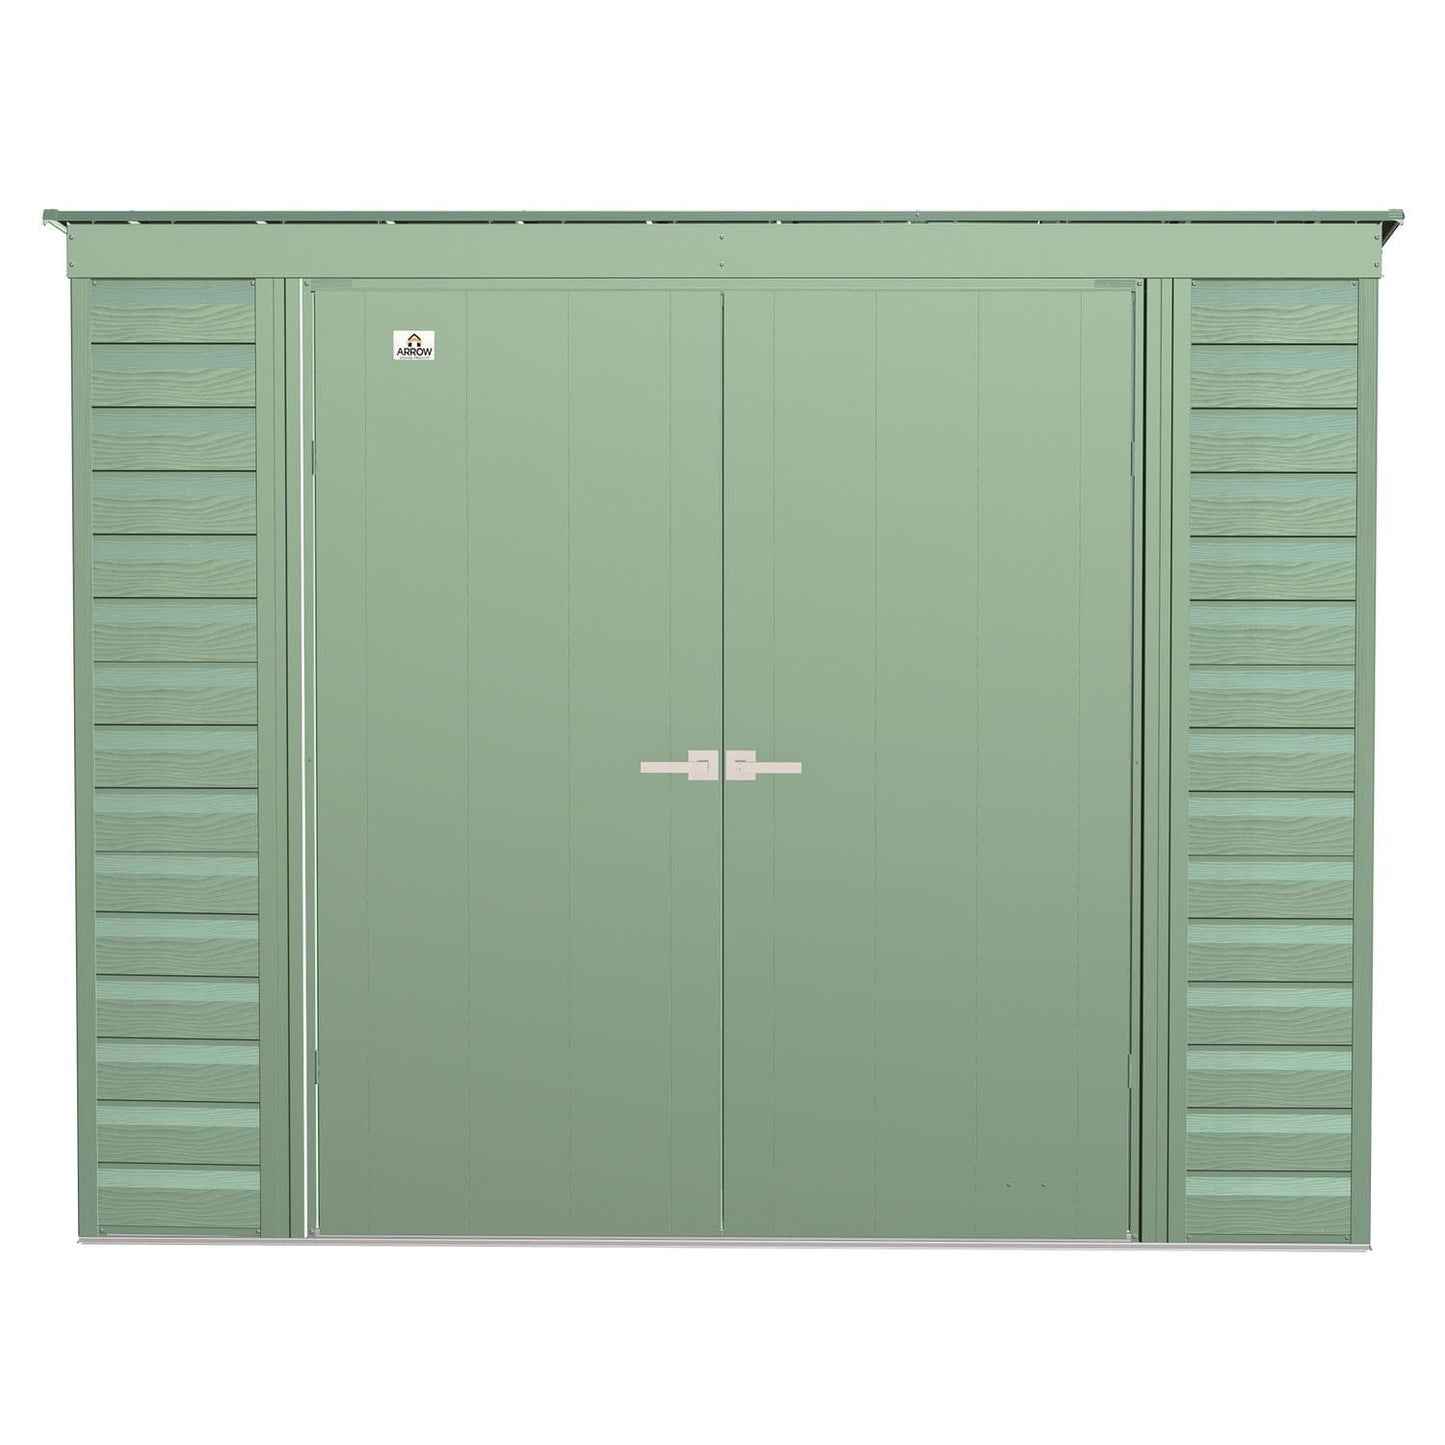 Arrow Sheds & Storage Buildings Arrow | Select Pent Roof Steel Storage Shed, 8x4 ft., Sage Green SCP84SG